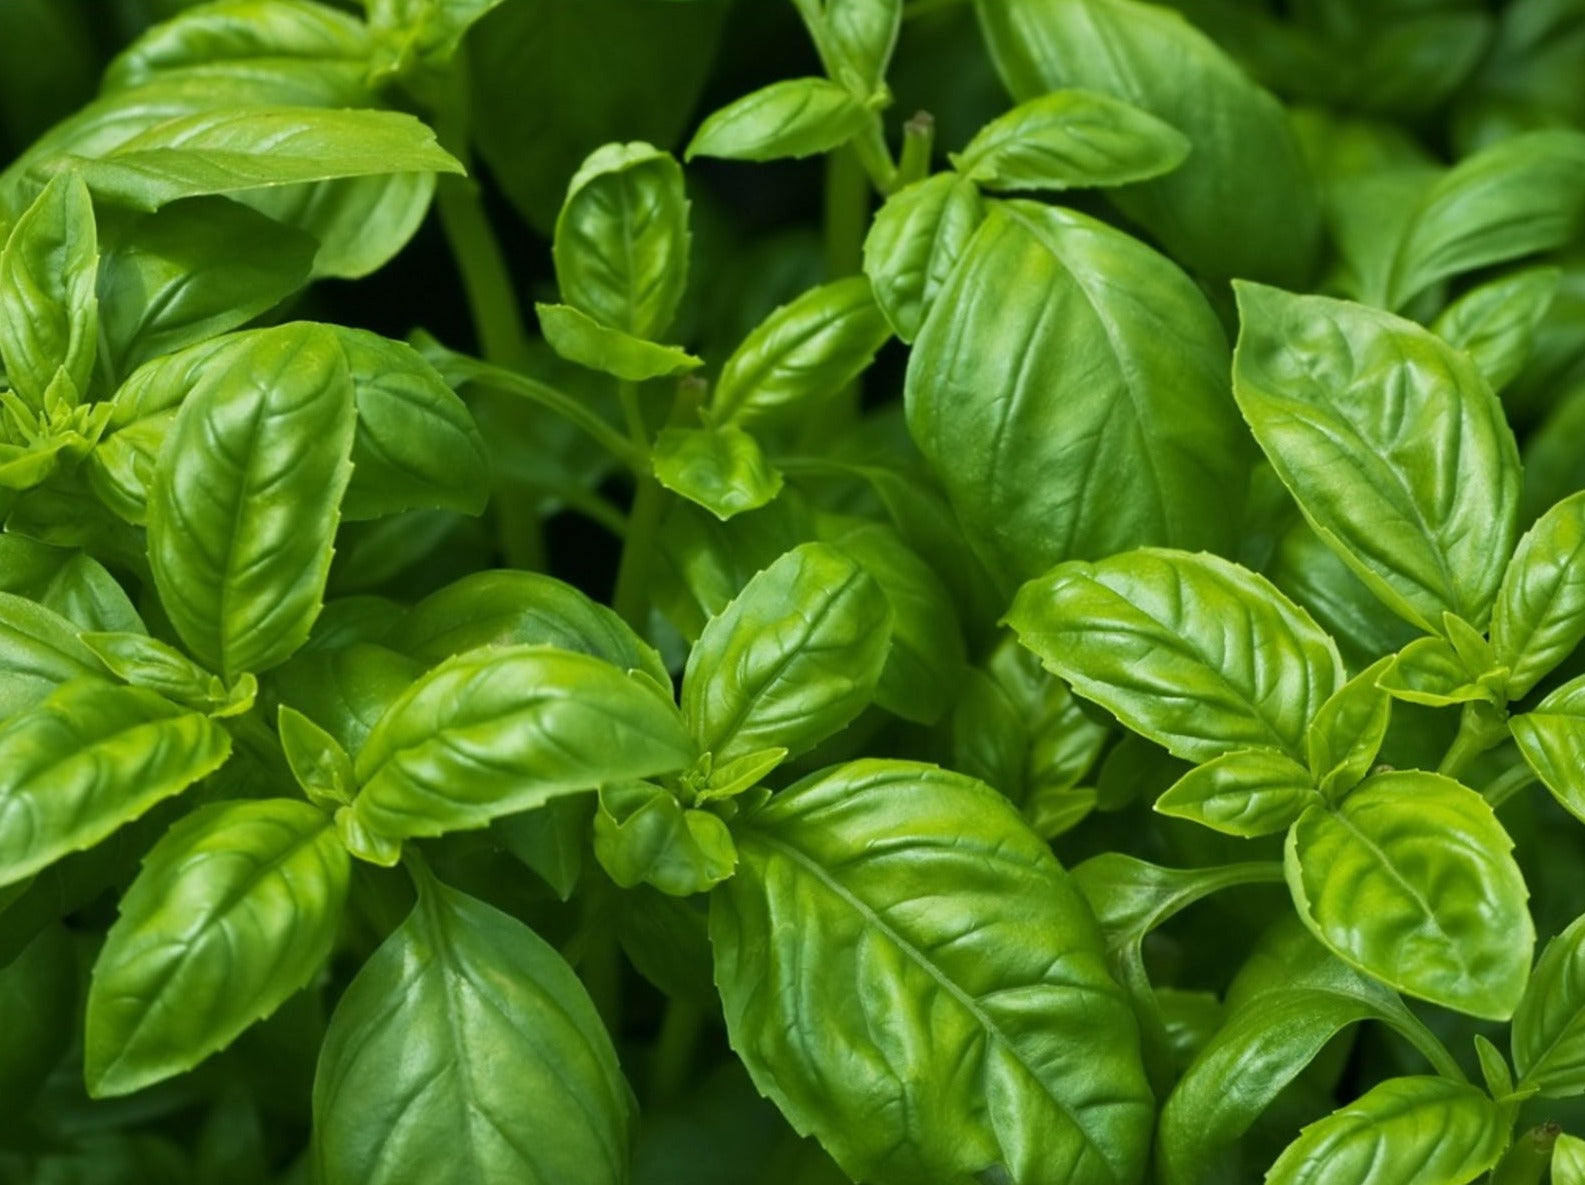 Fresh Basil leaves vibrant and green freshly grown before being turned into an Essential Oil or being used for cooking.